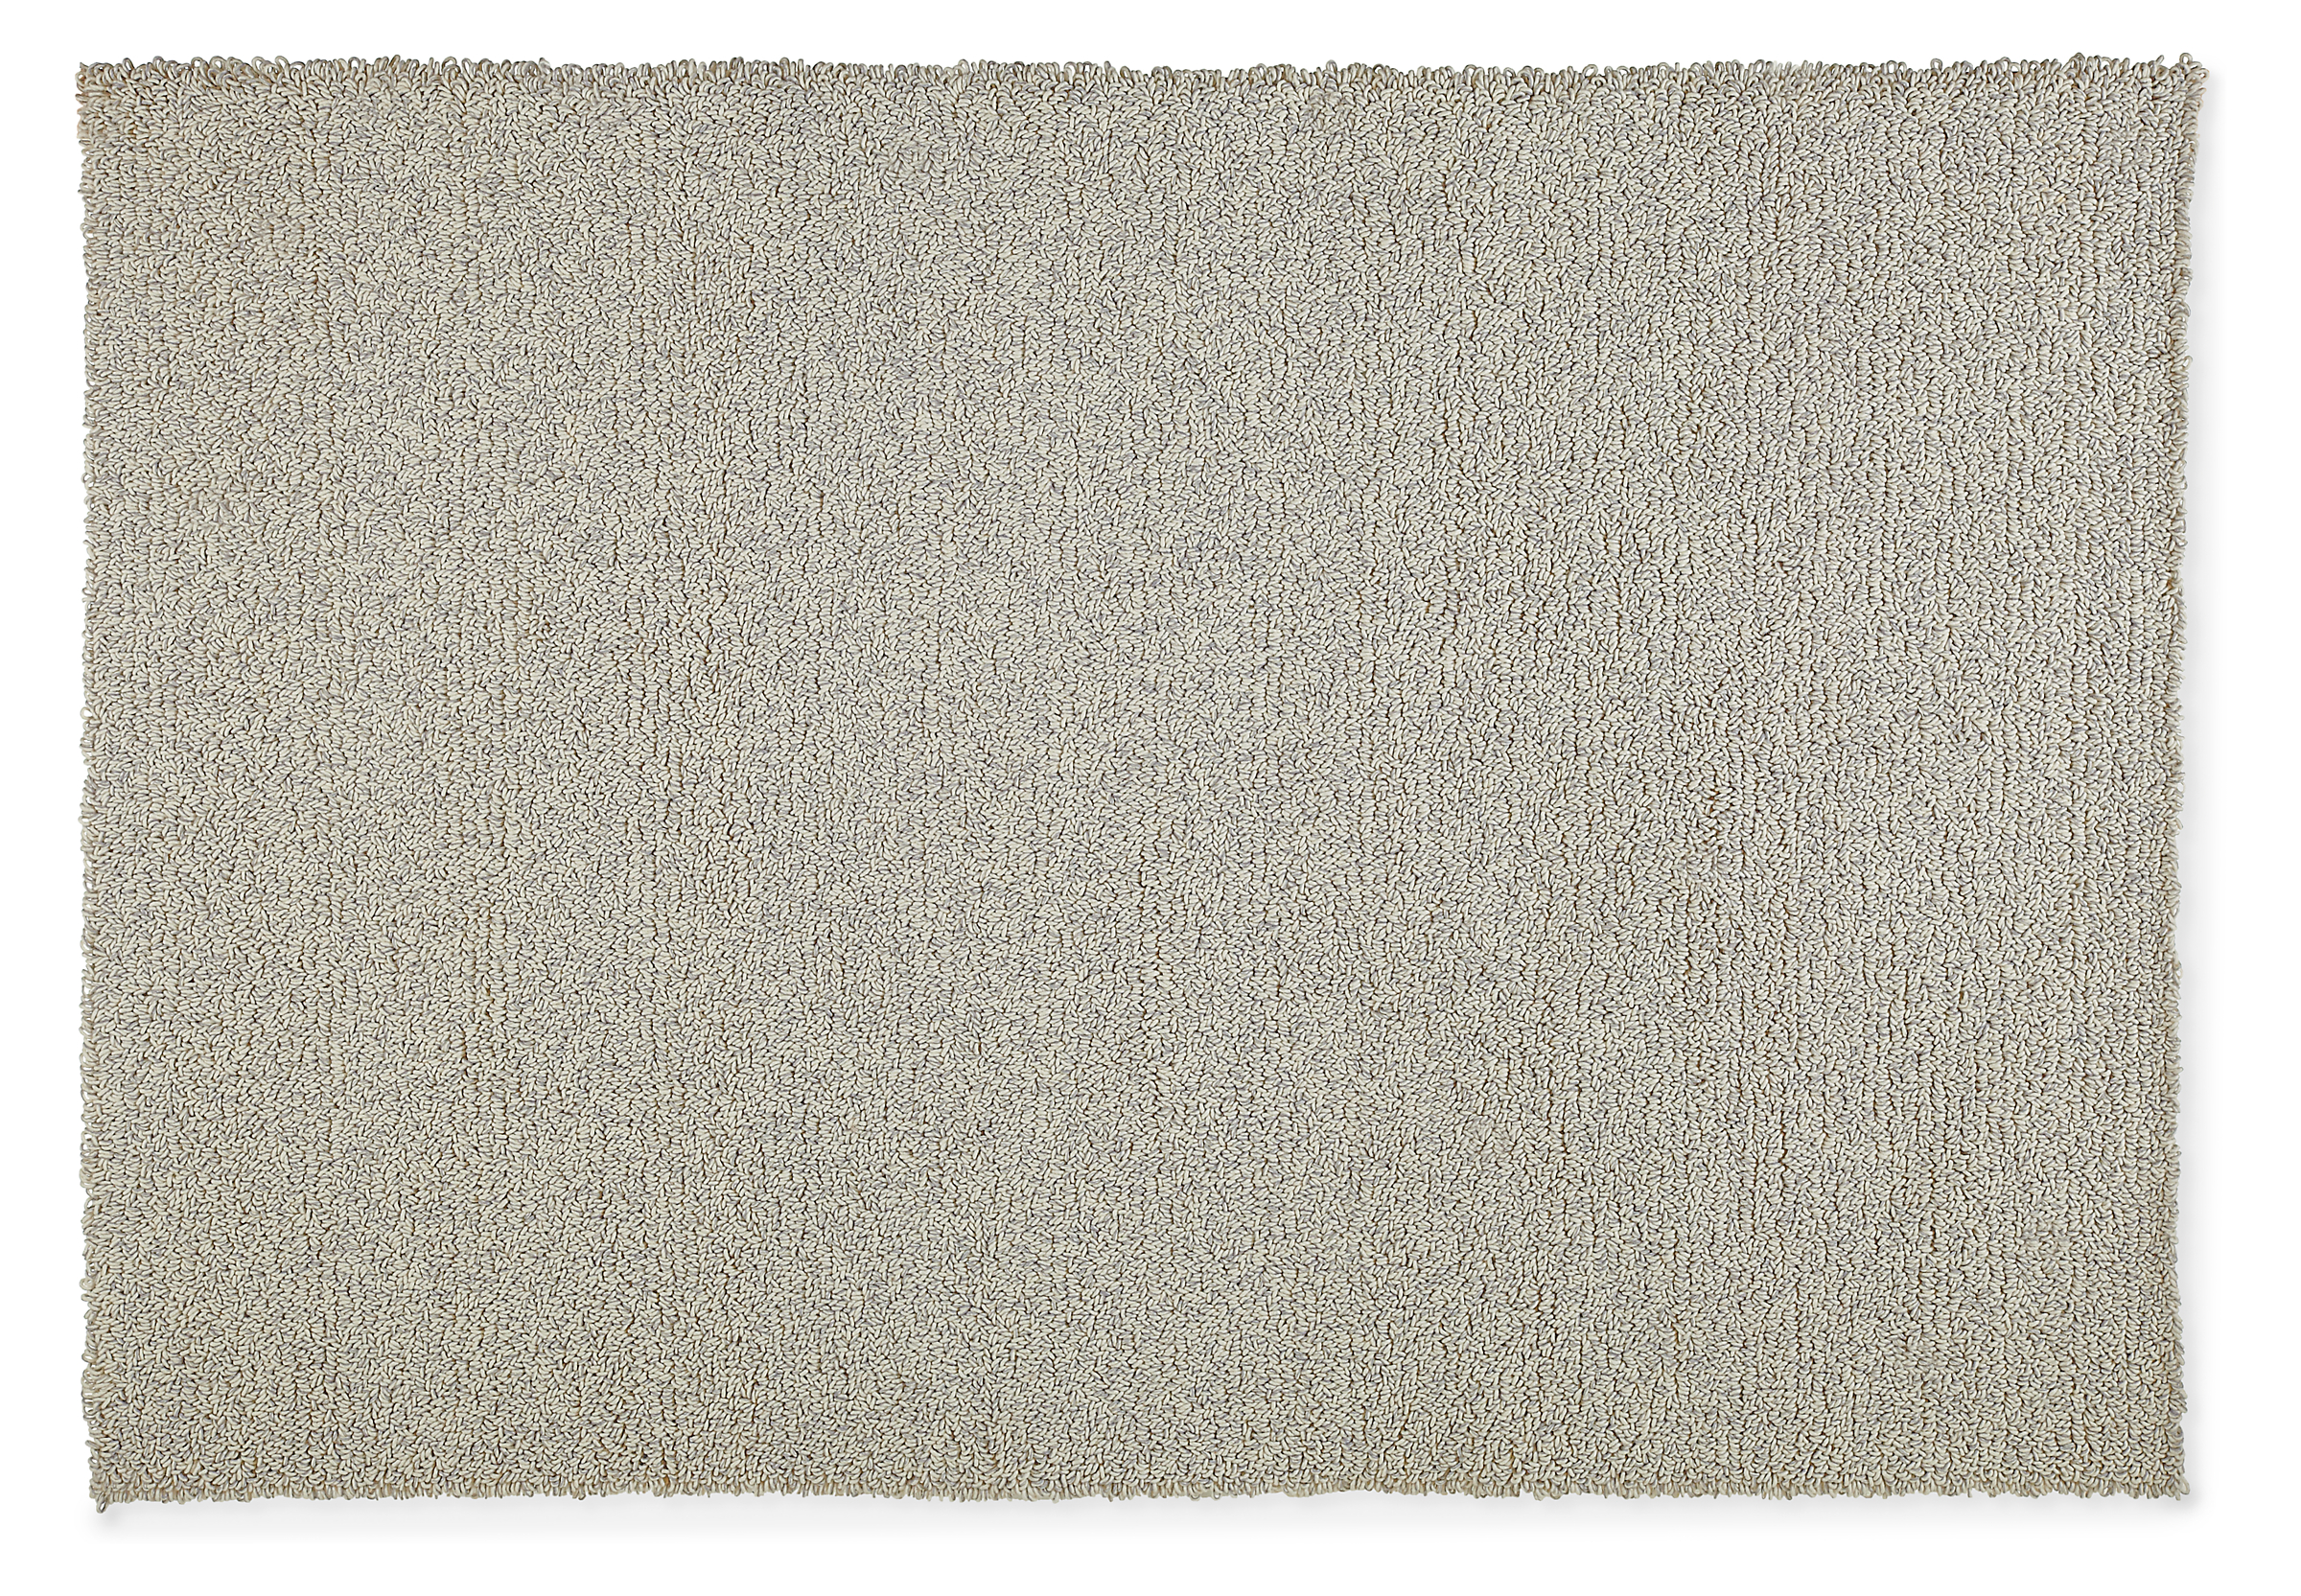 Arden High Loop 10'6"x10'6" Square Rug in Ivory/Grey